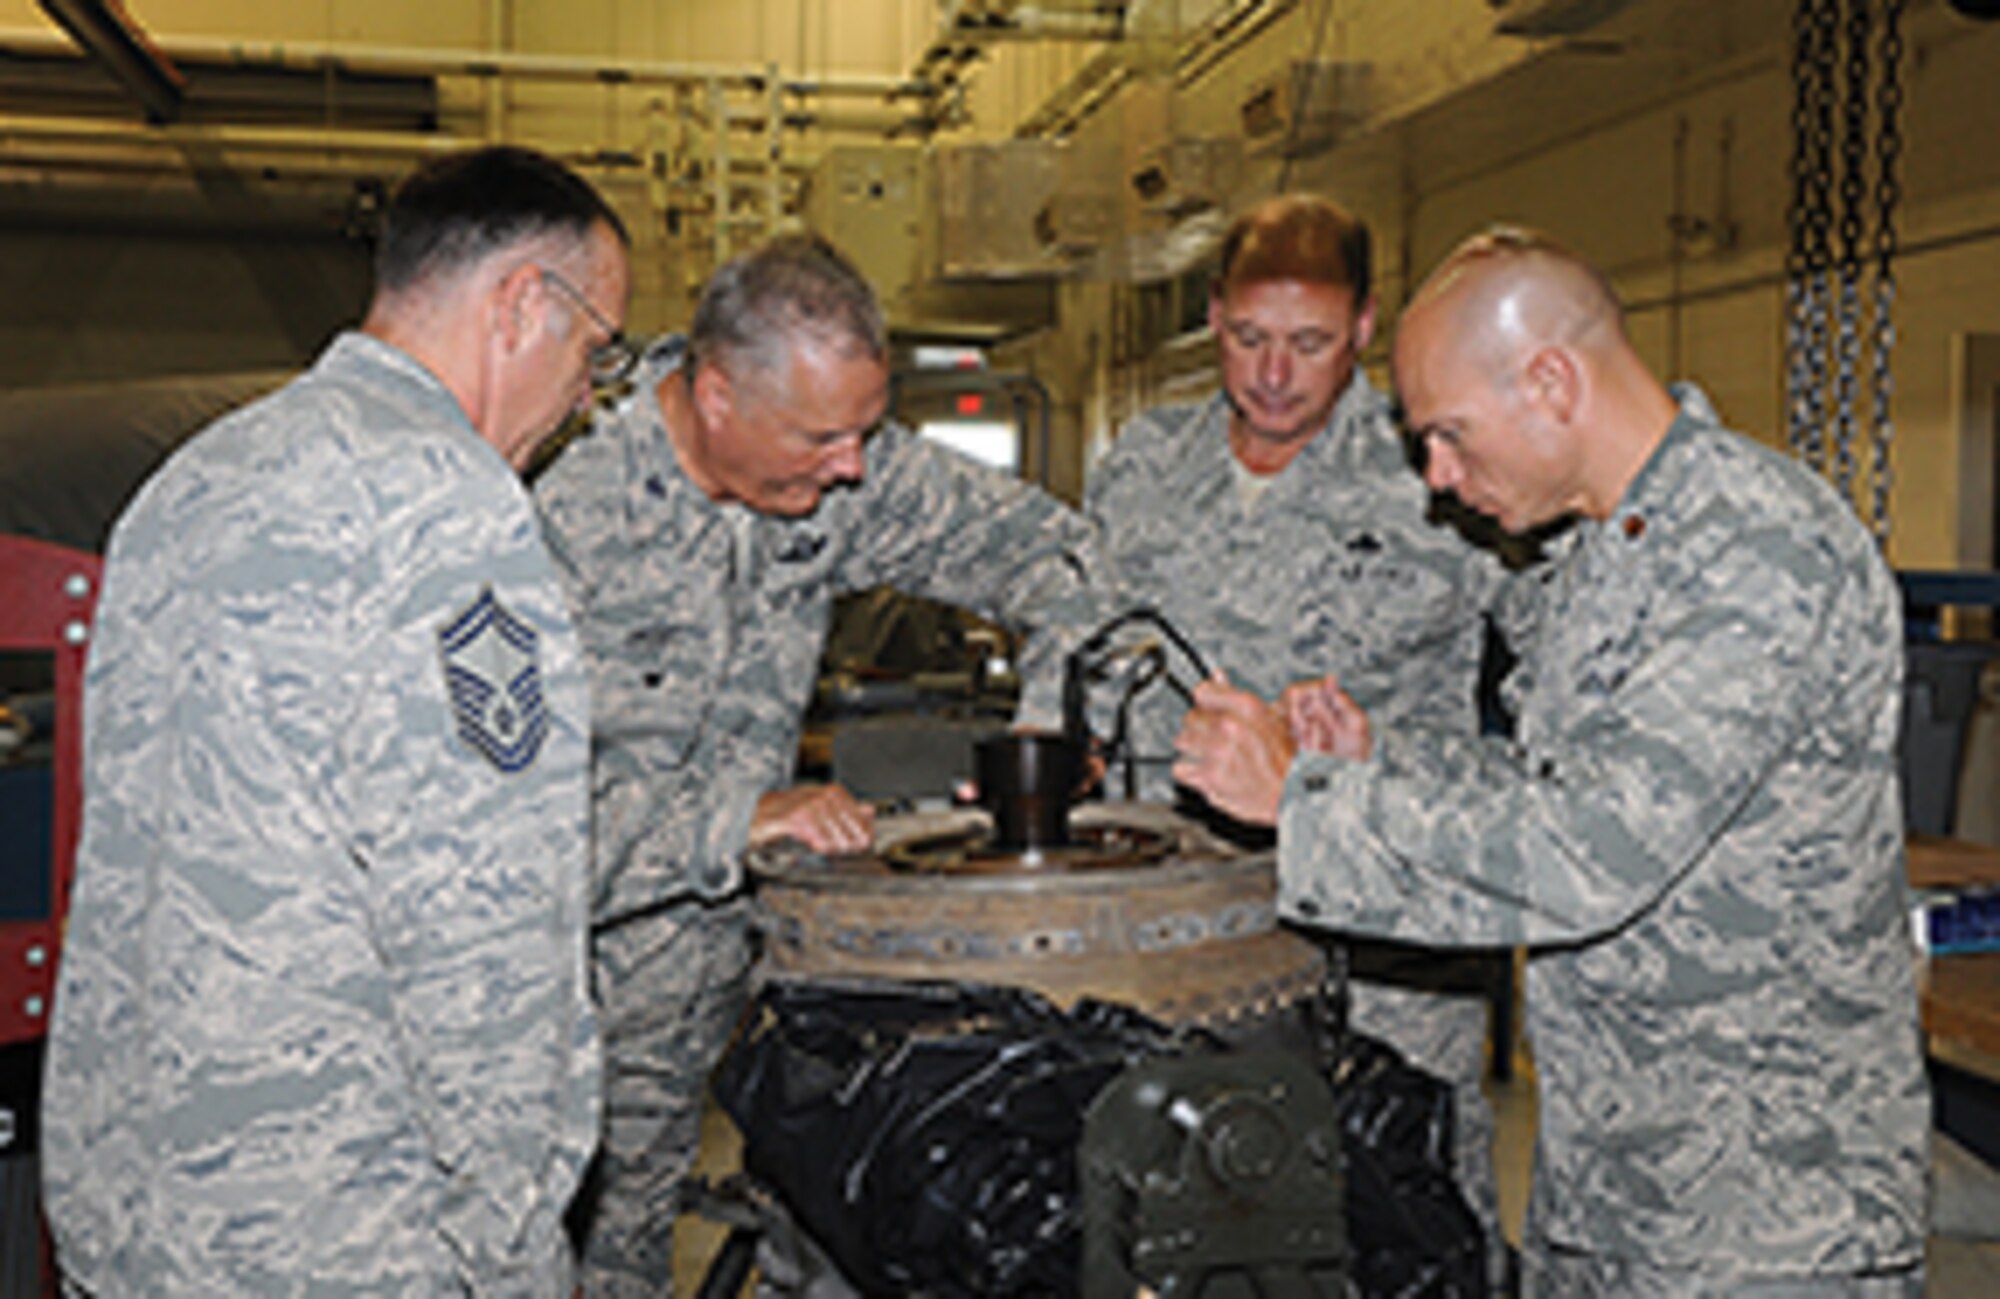 Senior Master Sgt. Michael Smith of the 908th MXS Propulsion Shop, far left, Senior Master Sgt. Dain Payton, MXS Superintendent, second from right; and MXS Operation Officer Maj. Brian Horton, far right, show Col. Jimmie Brooks, new 908th Airlift Wing Vice Commander, a cracked C-130 engine turbine section.